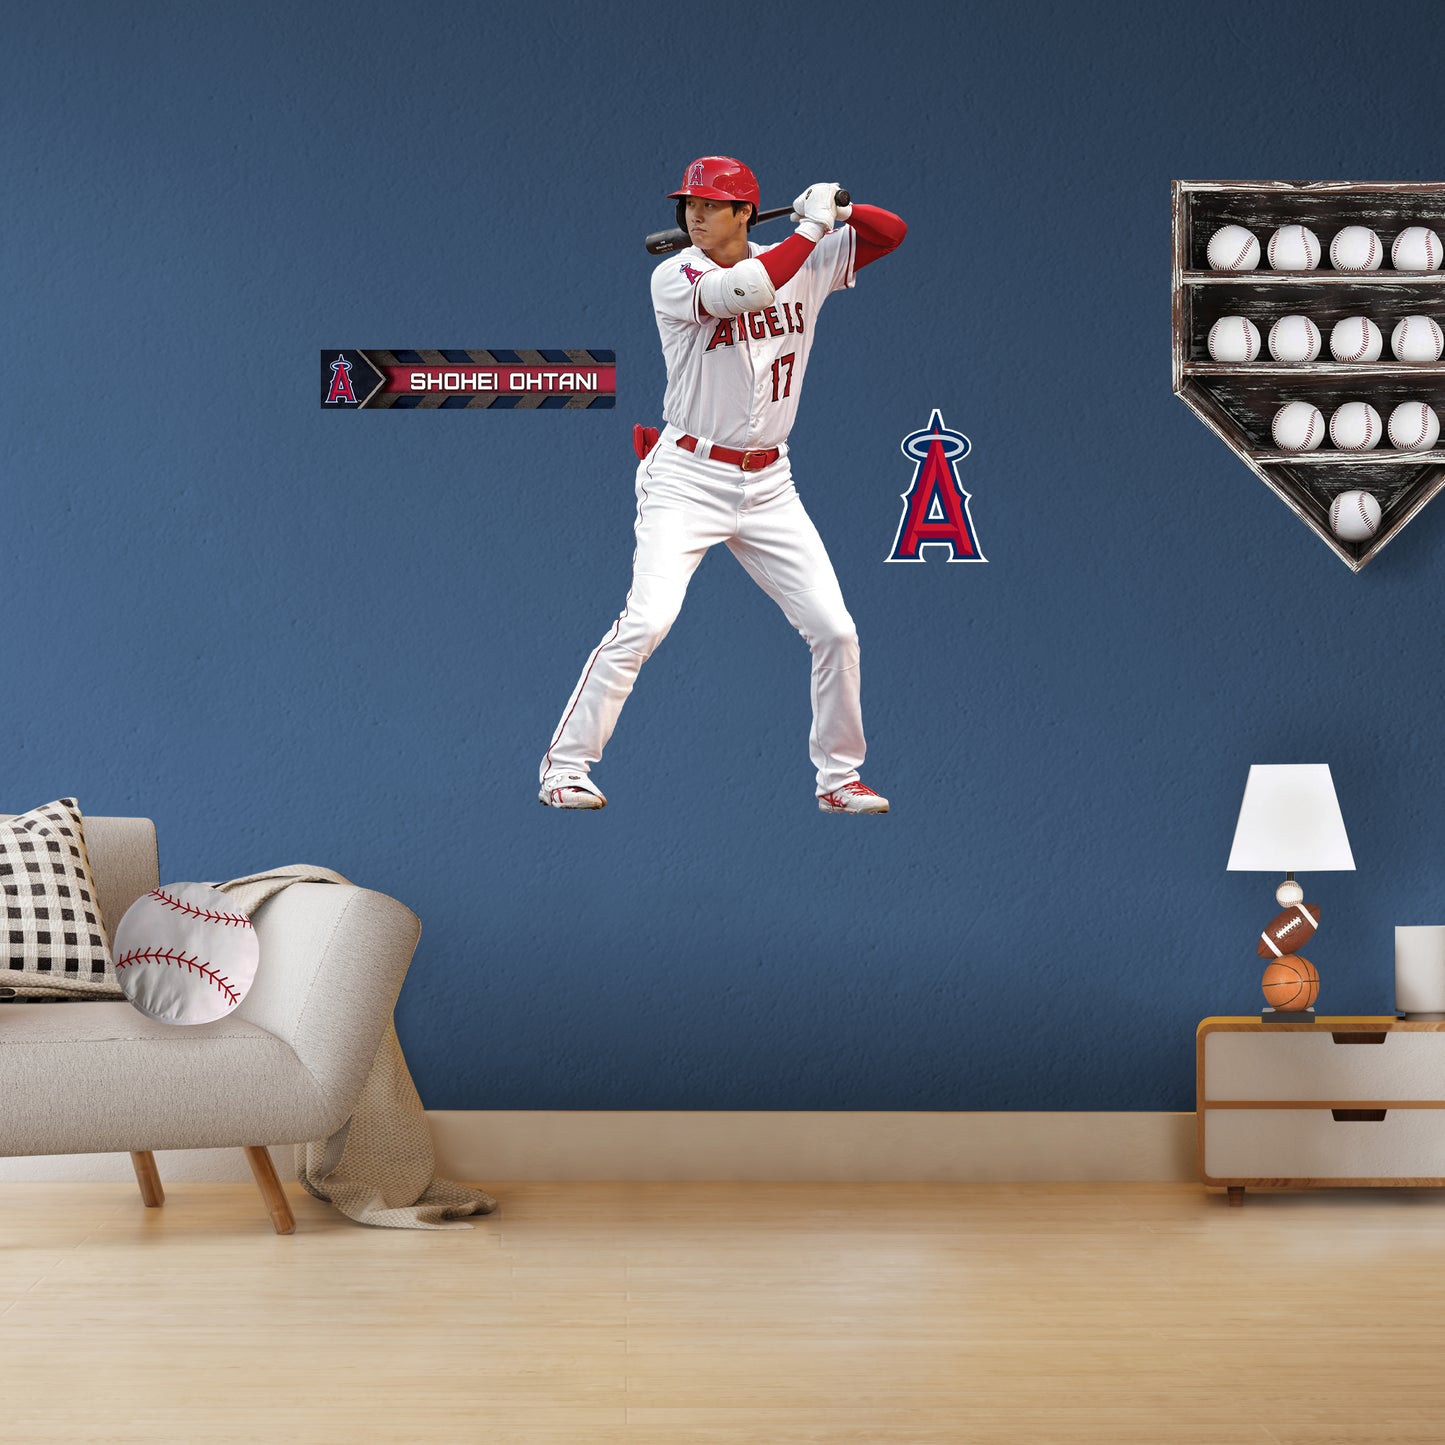 Los Angeles Angels: Shohei Ohtani - Officially Licensed MLB Removable Adhesive Decal